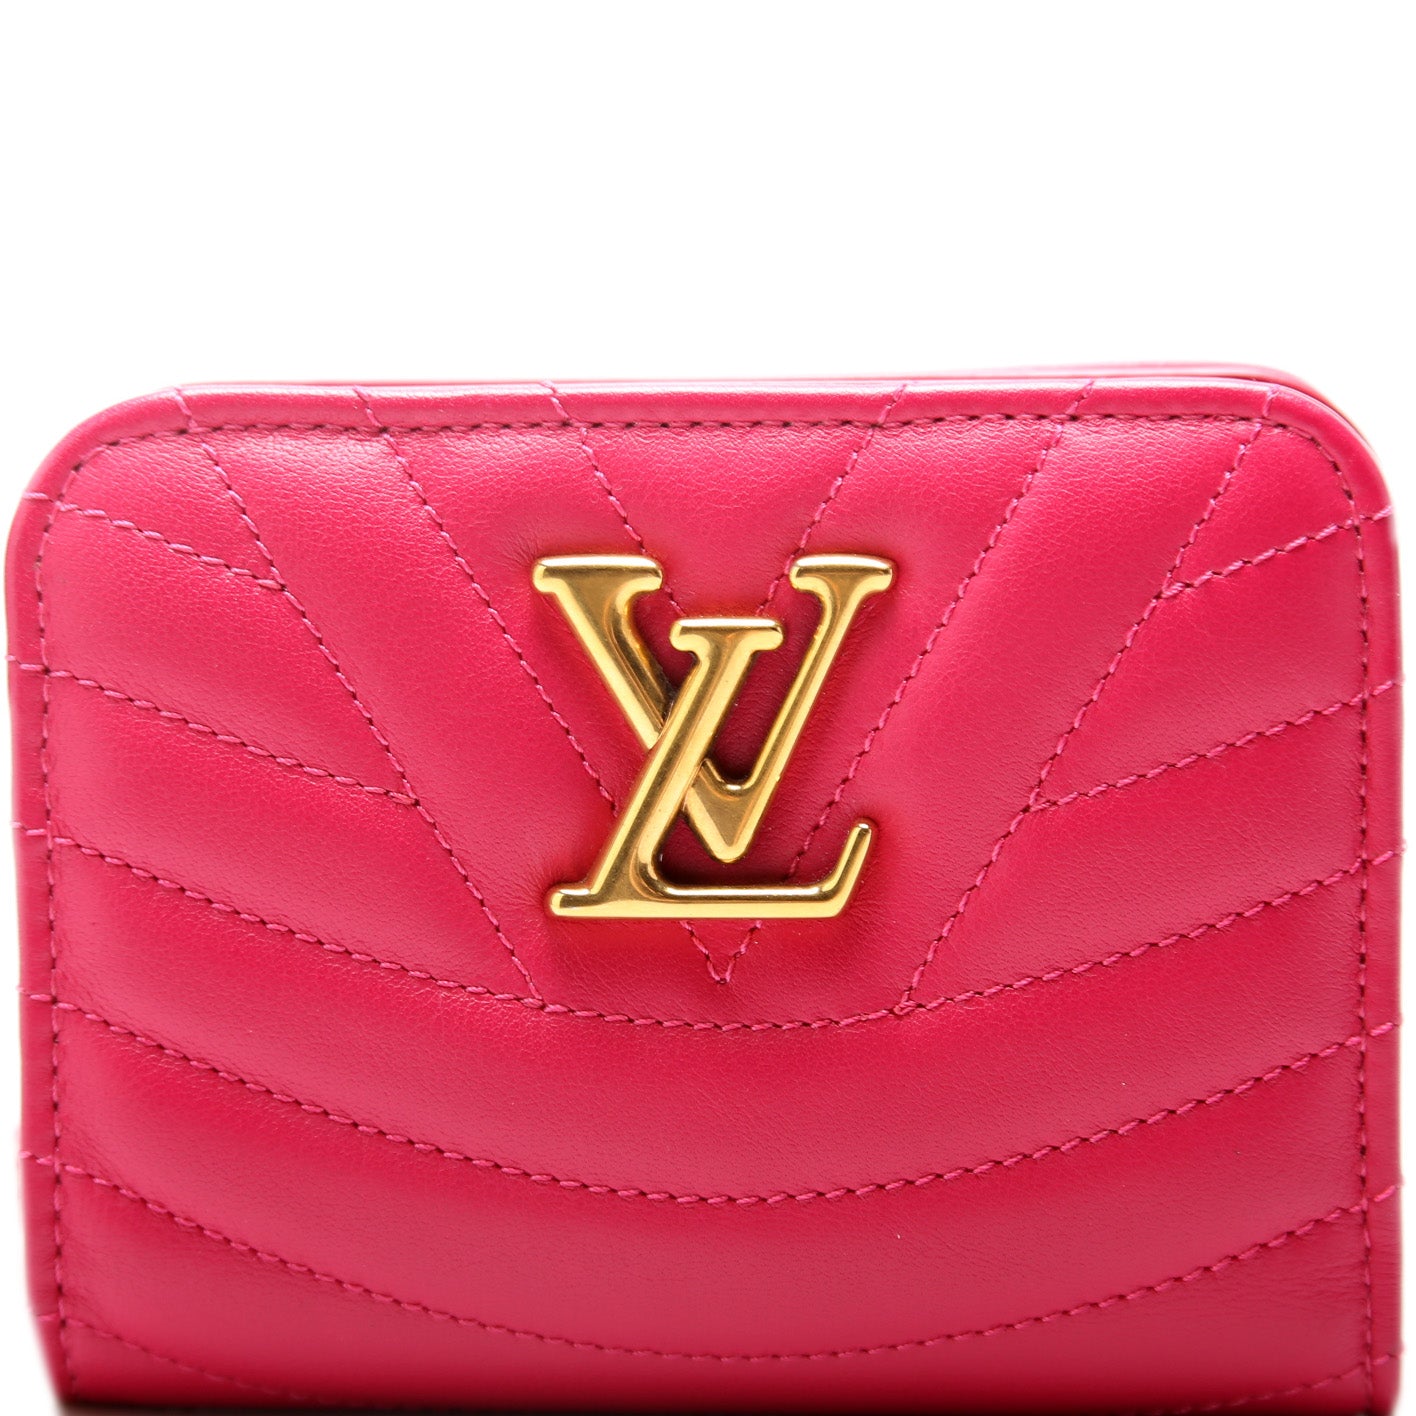 Louis Vuitton - Authenticated New Wave Handbag - Leather Red for Women, Very Good Condition